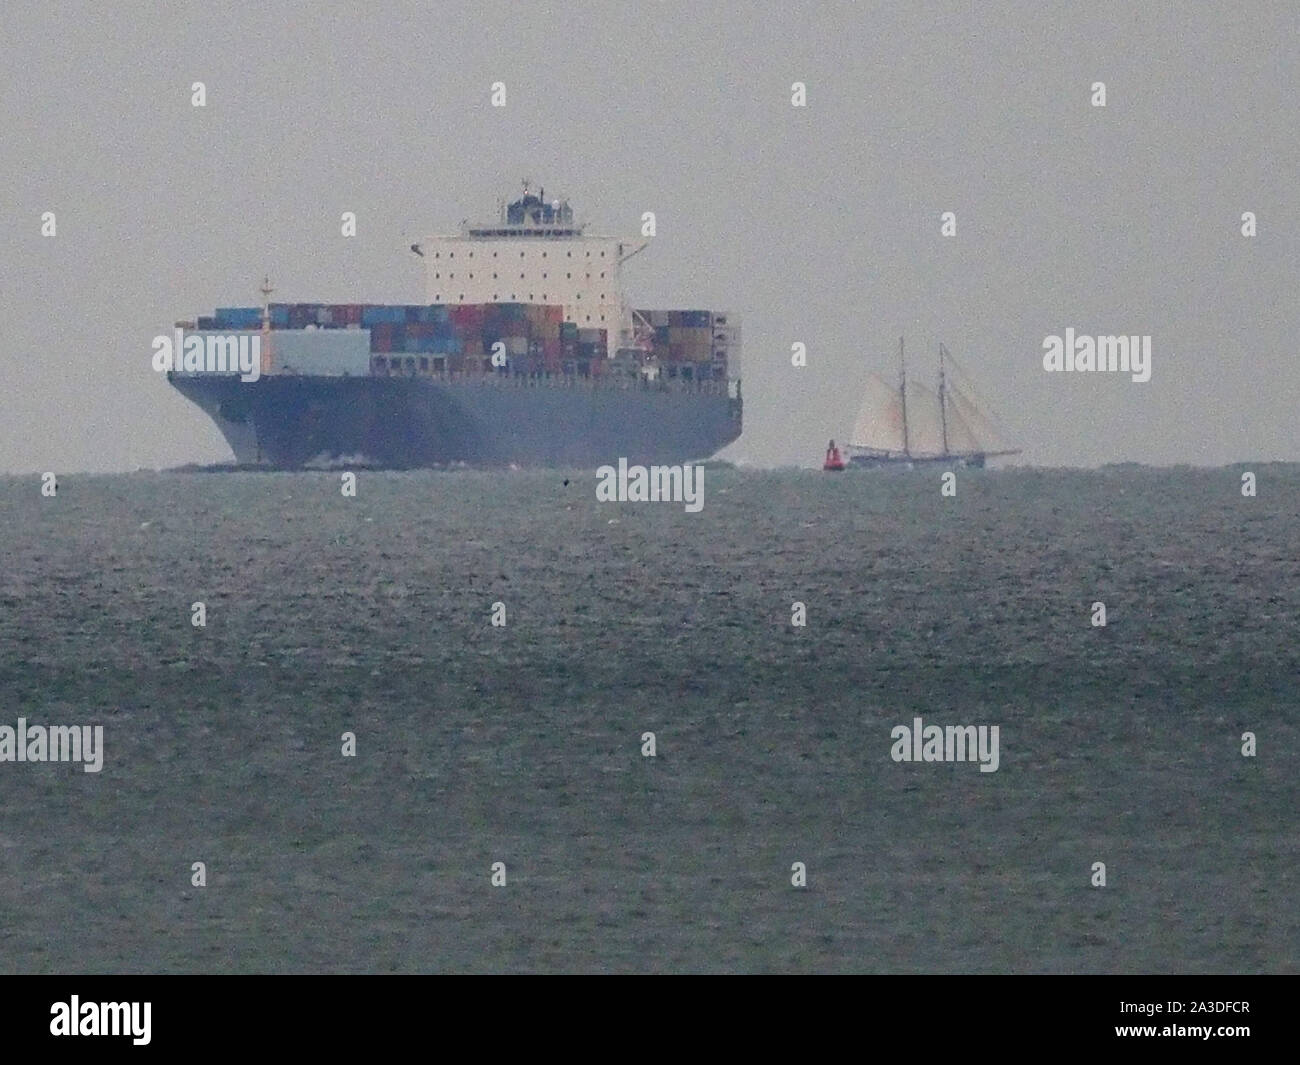 Sheerness, Kent, UK. 7th October, 2019. Historic sailing ship De Gallant seen sailing  passing Sheerness, Kent just before nightfall this evening in foul weather before anchoring overnight. De Gallant is transporting a special cargo of wine, coffee, spices and more to London. It’s thought to be the first major cargo arriving by sail since the 1960s. Pictured: seen crossing the path of modern containership SM Charleston. Credit: James Bell/Alamy Live News Stock Photo